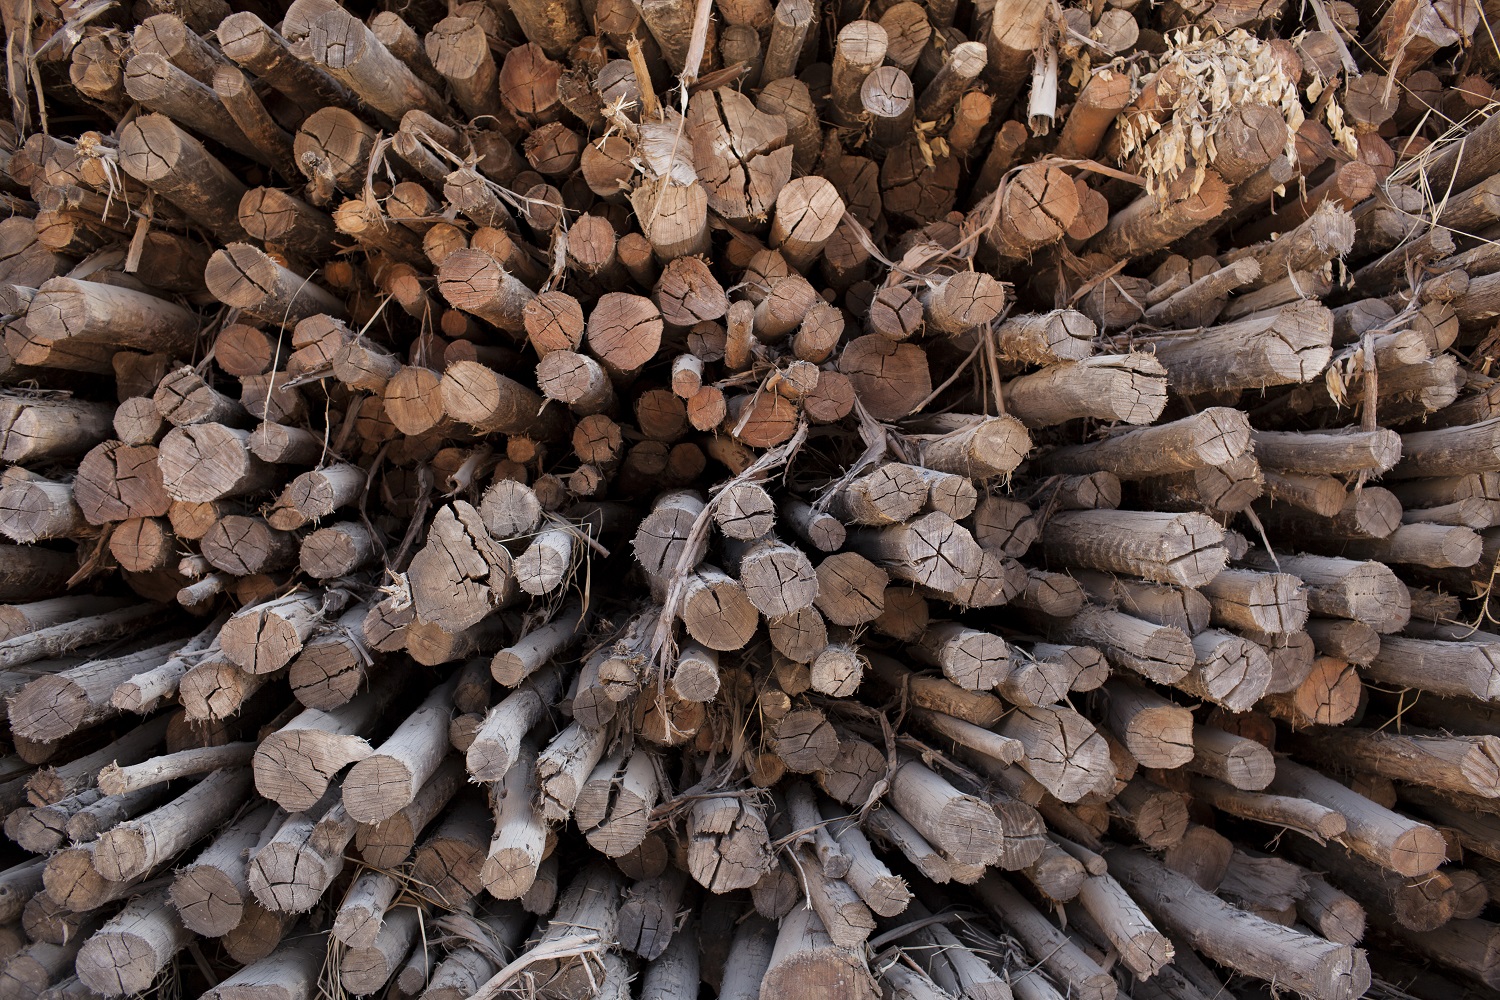 Veolia's technology will optimise the processing of wood-derived pulp used to make cellulose fibres.